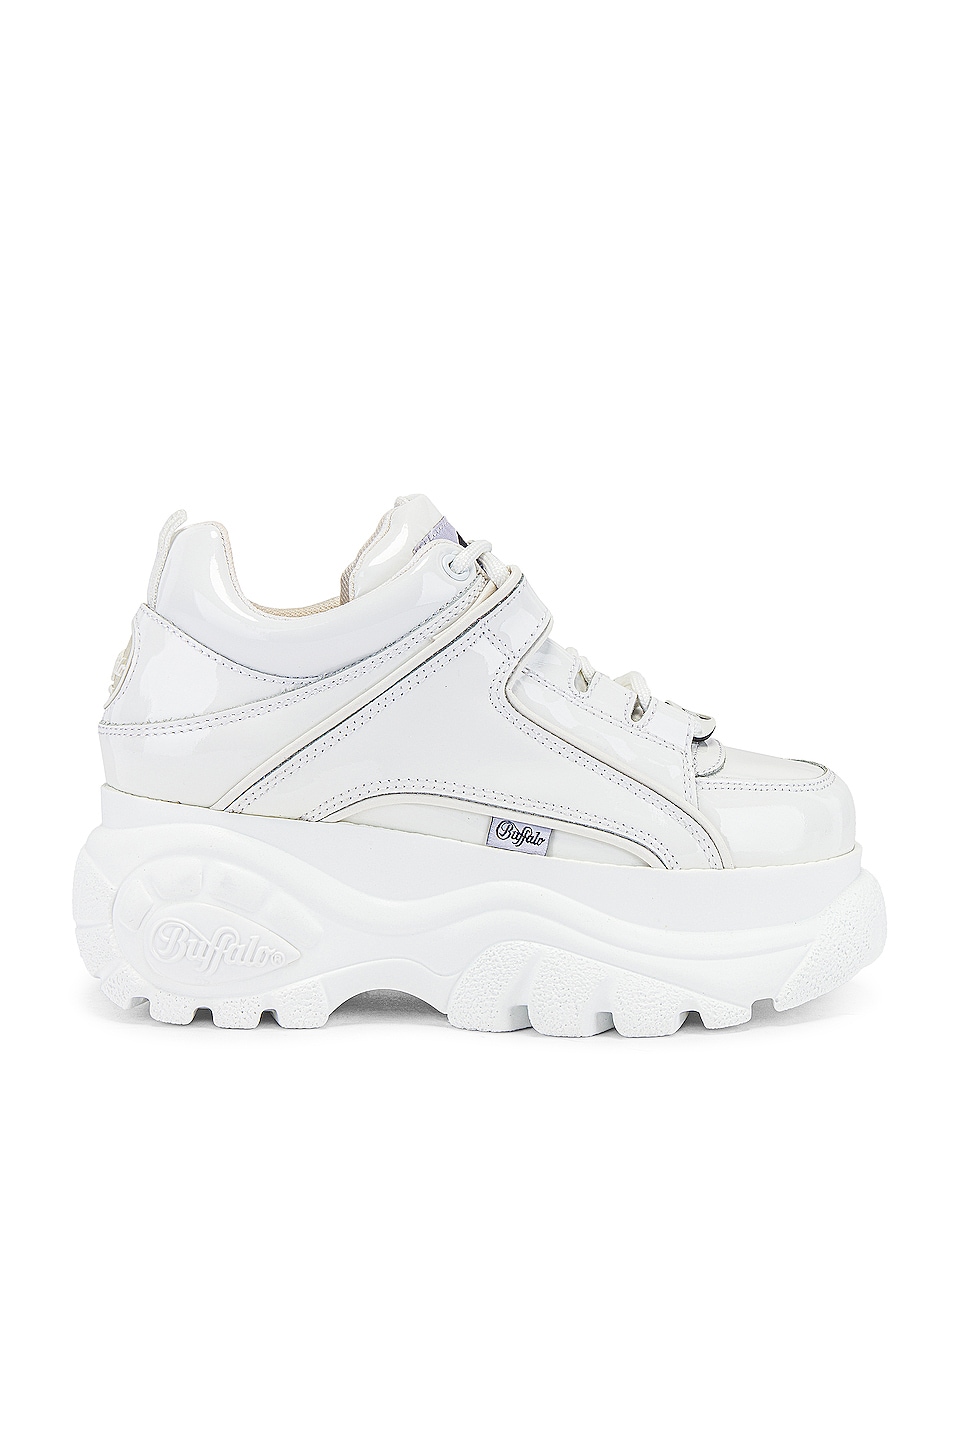 buffalo classic low white patent leather